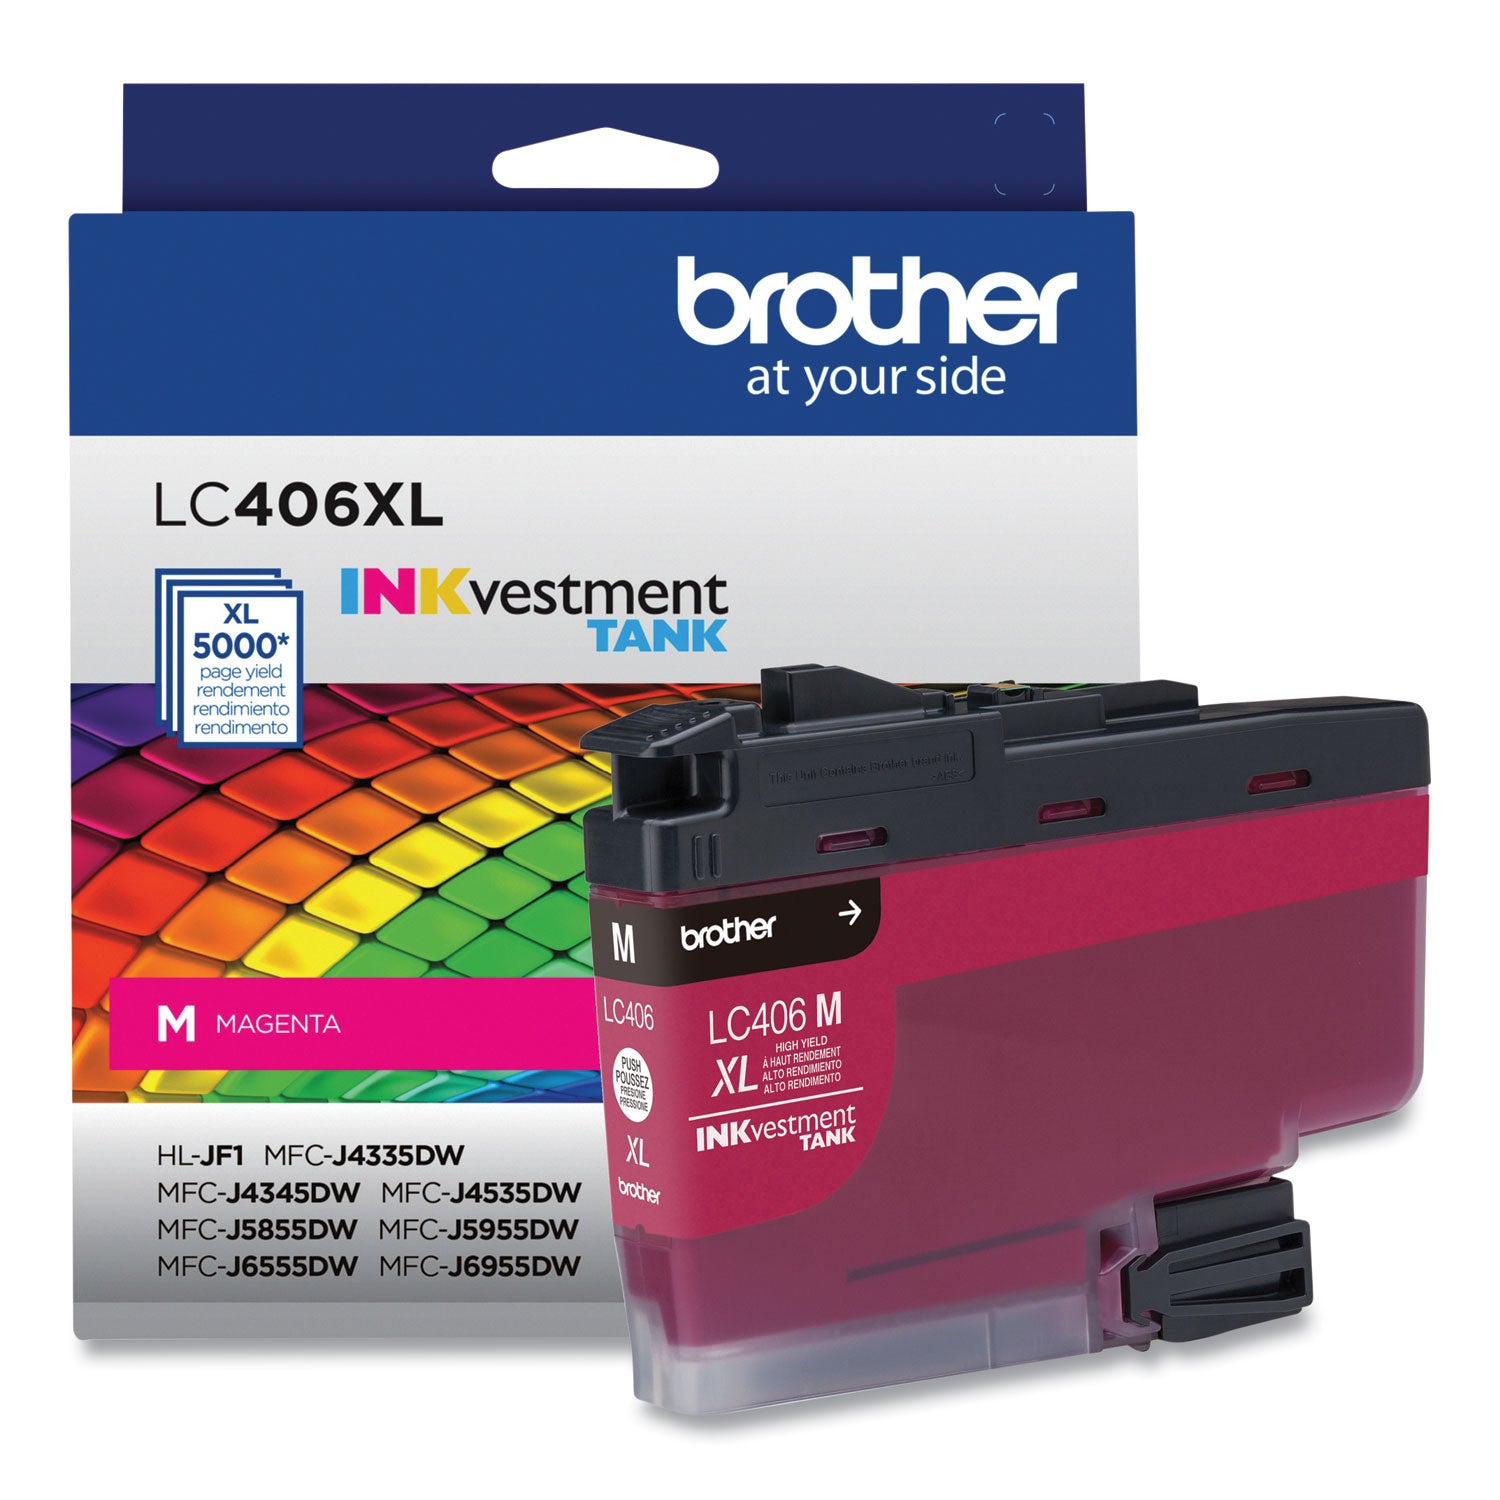 lc406xlms-inkvestment-high-yield-ink-5000-page-yield-magenta_brtlc406xlms - 4